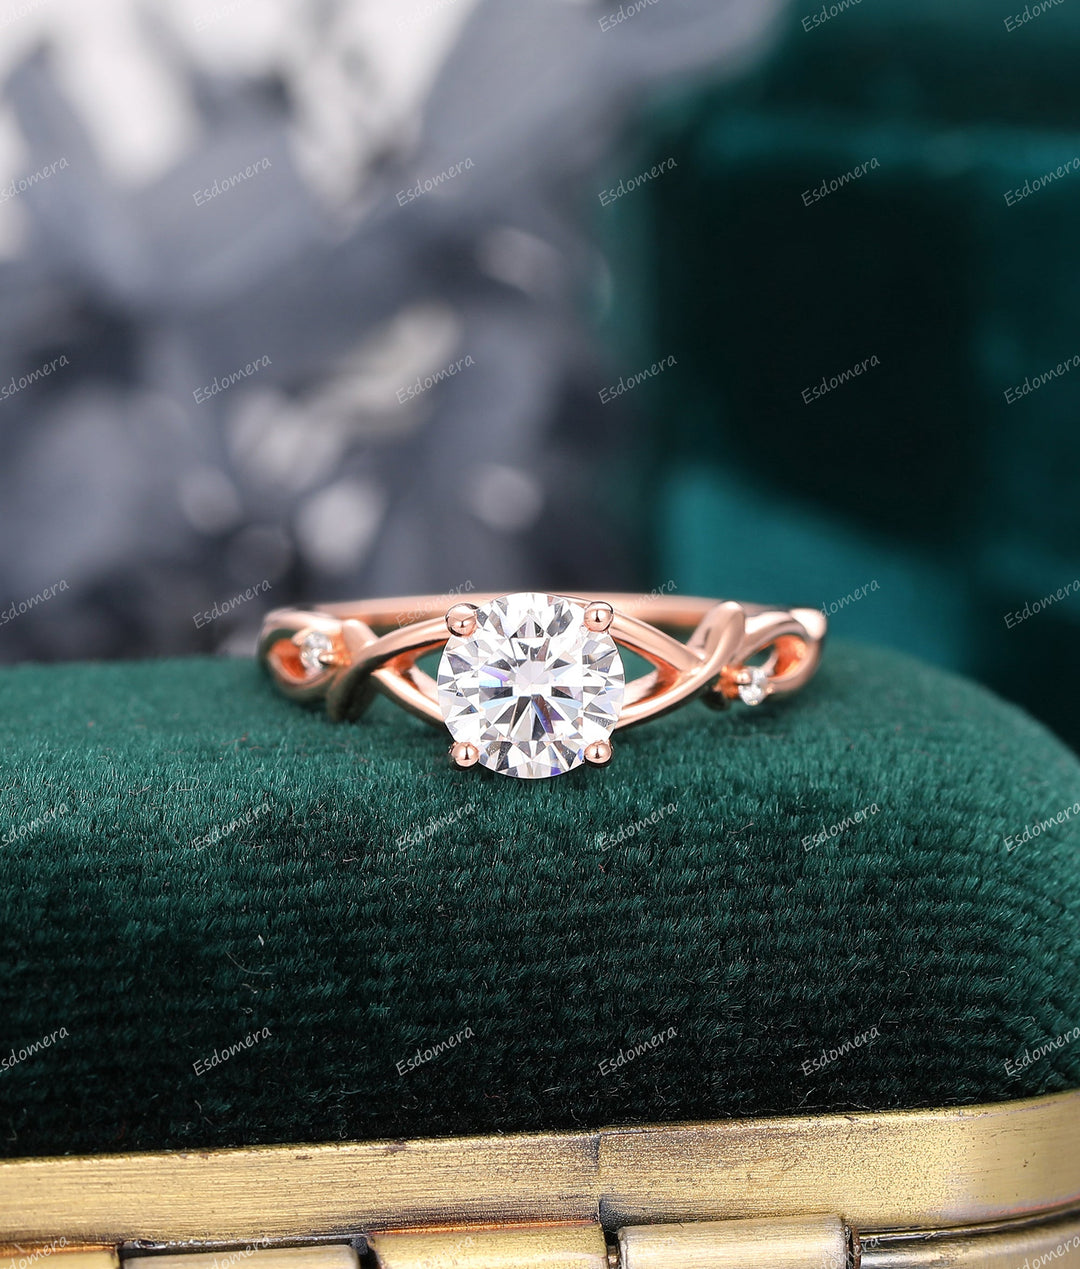 1.00CT Round Cut Moissanite Wedding Ring, Cross Band Ring, 14k Rose Gold Wedding Ring, Anniversary Gift For Her